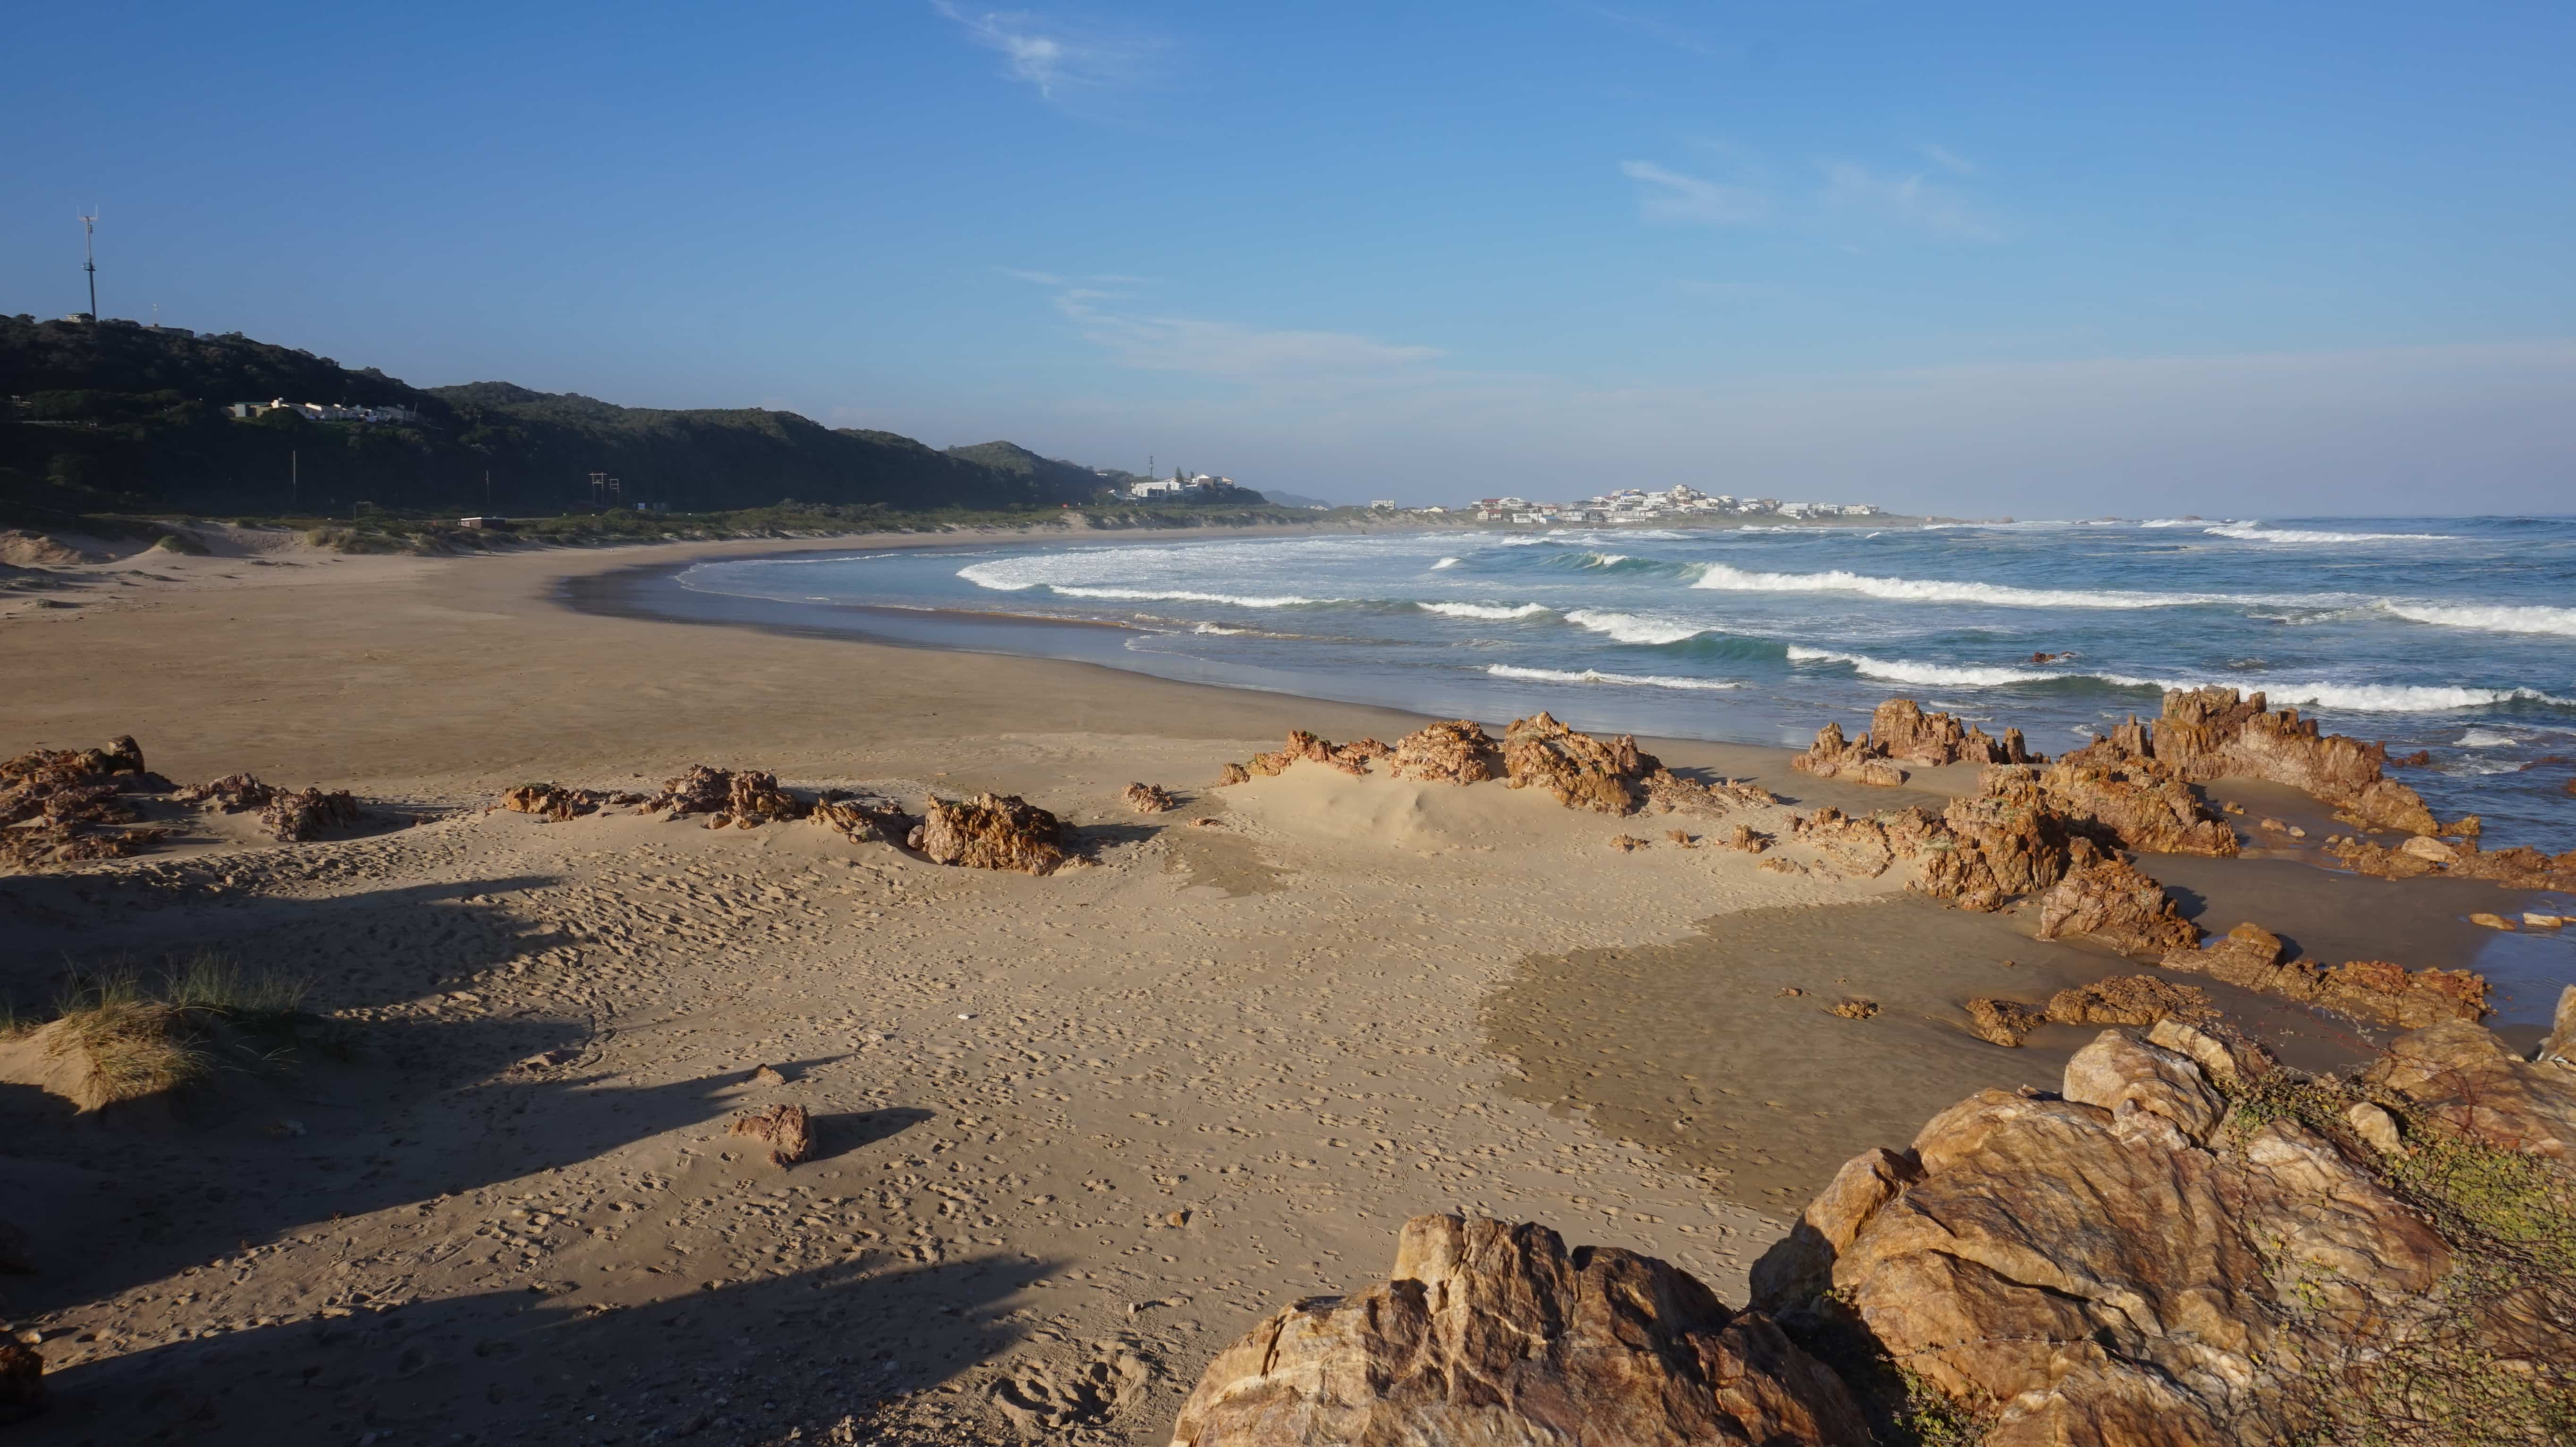 Beach in South Africa on the Garden Route